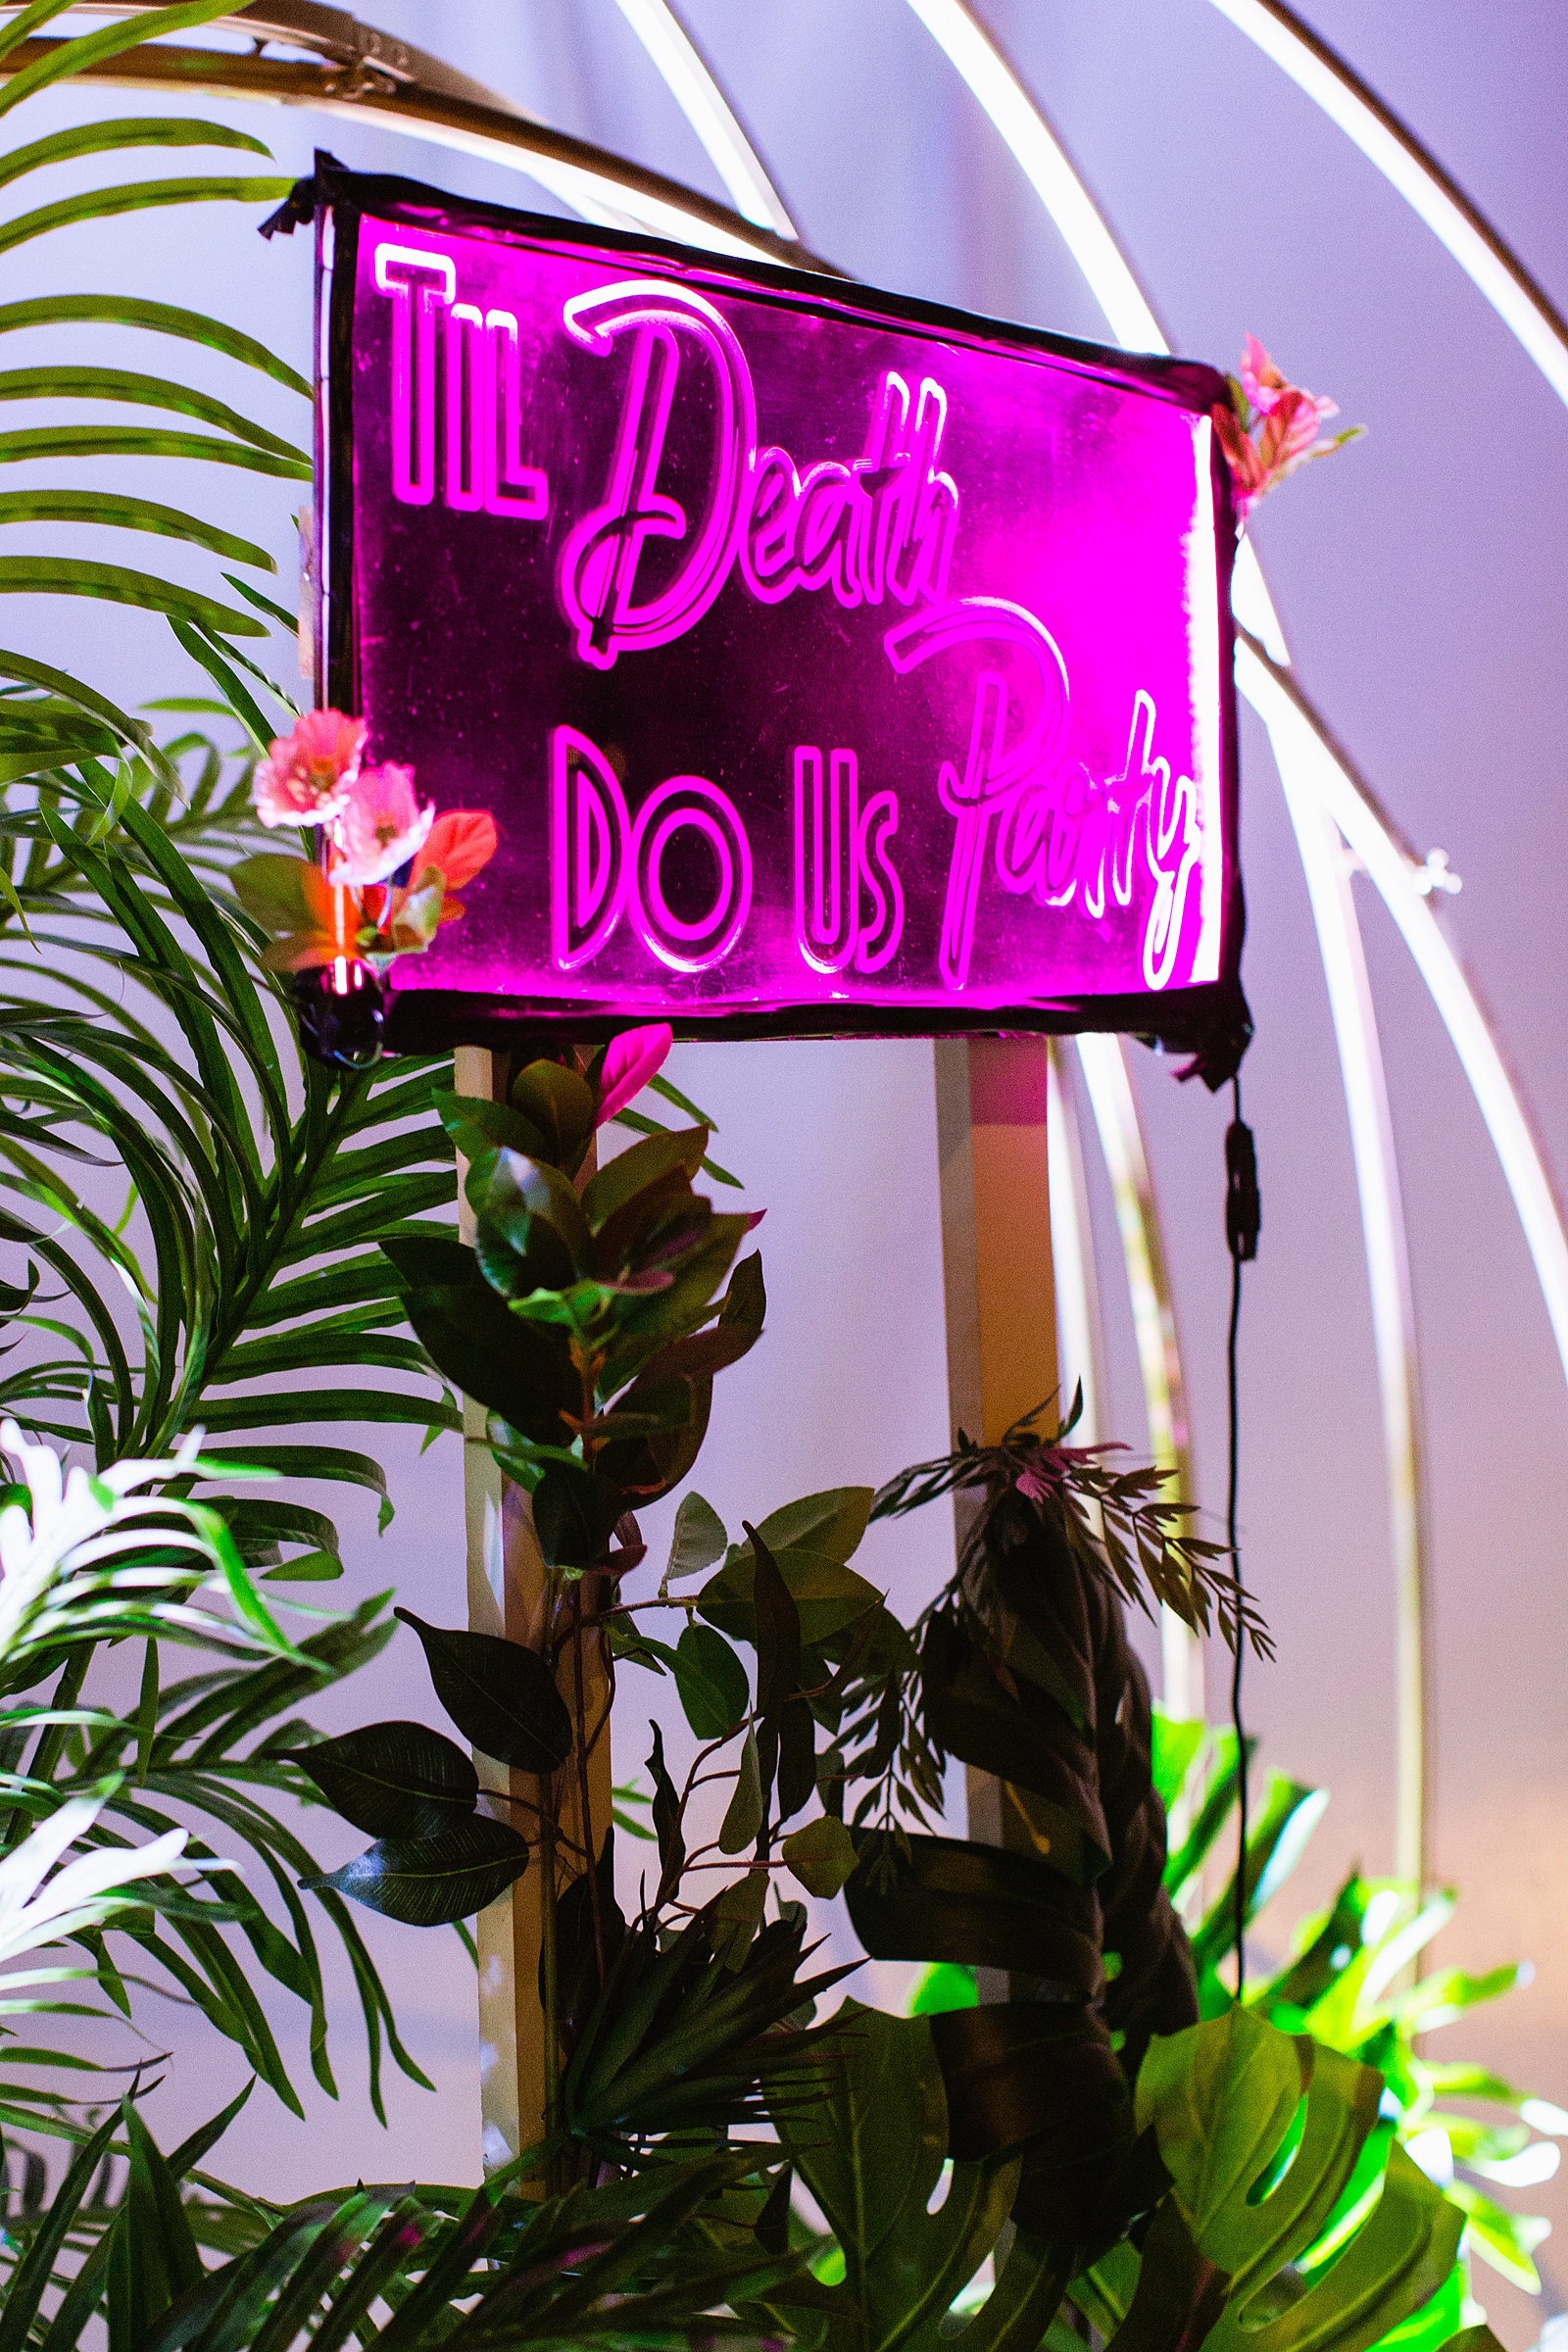 Til Death Do Us Party neon sign for decoration on the dancefloor at a MonOrchid wedding by Phoenix wedding photographer PMA Photography.